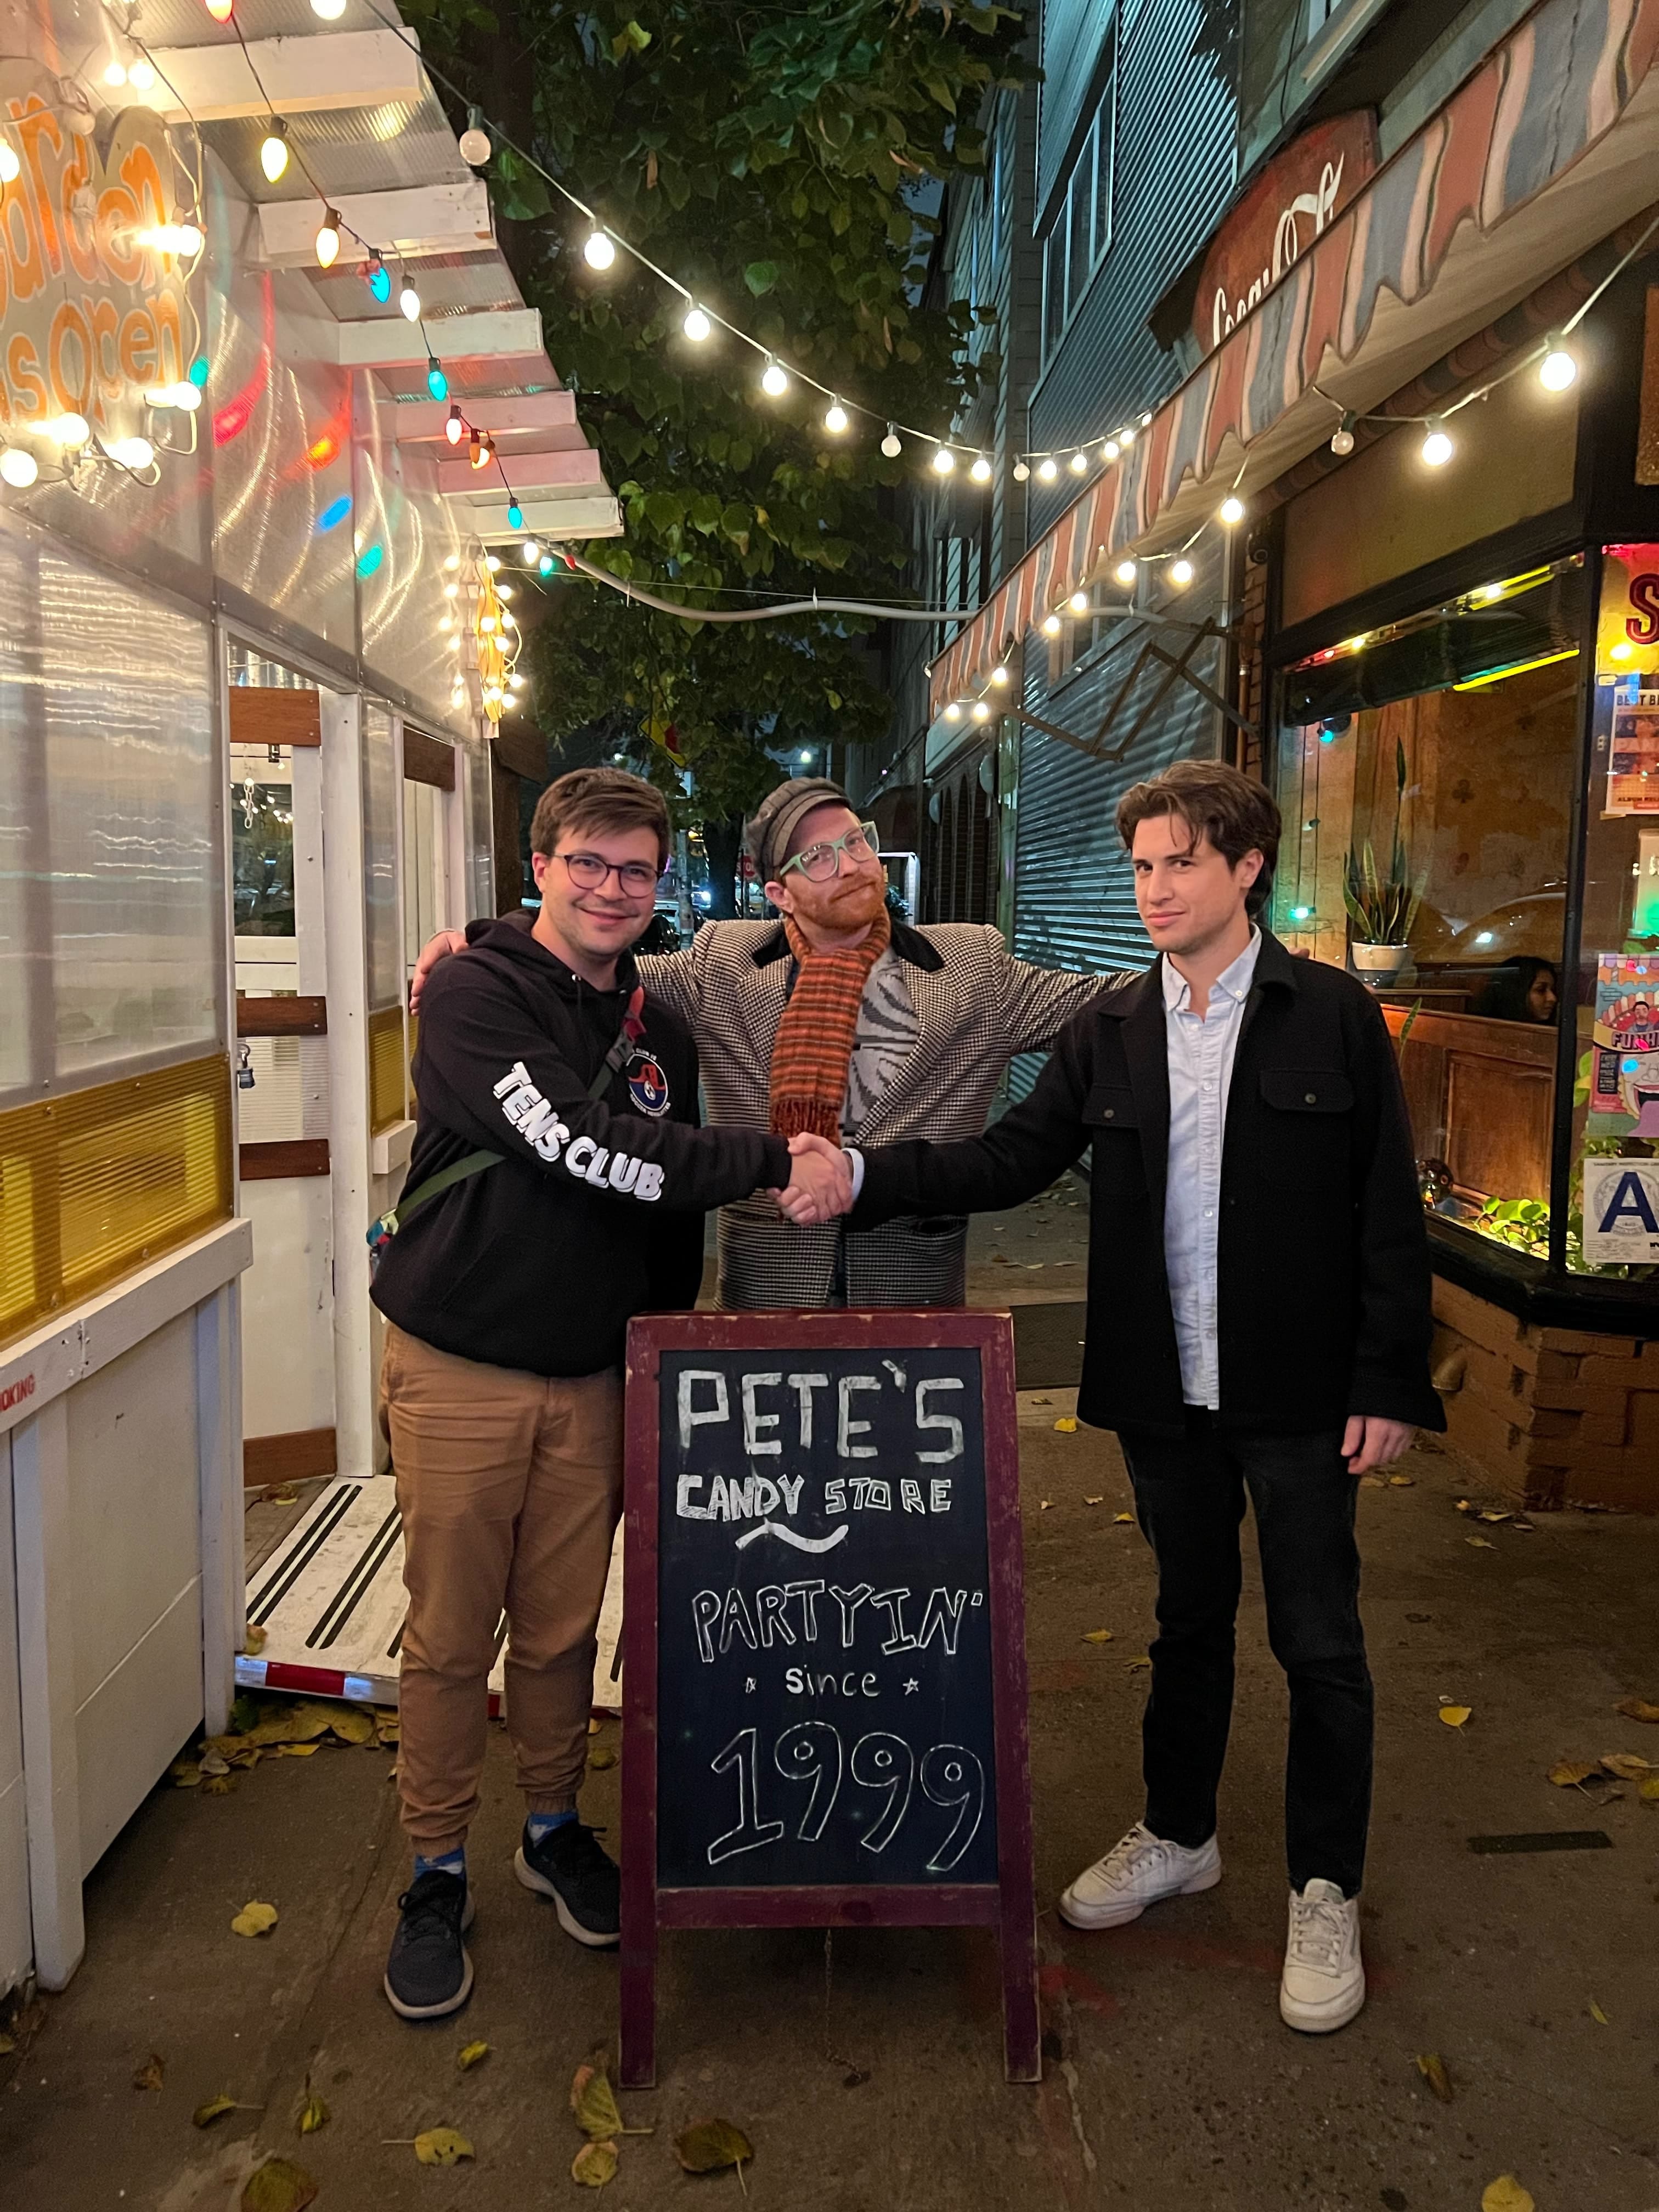 Three white men, all approximately 5'10", stand outside Pete's Candy Store in Greenpoint. The two men on the outer edges shake hands while the third man stands between them with his hands on their shoulders.